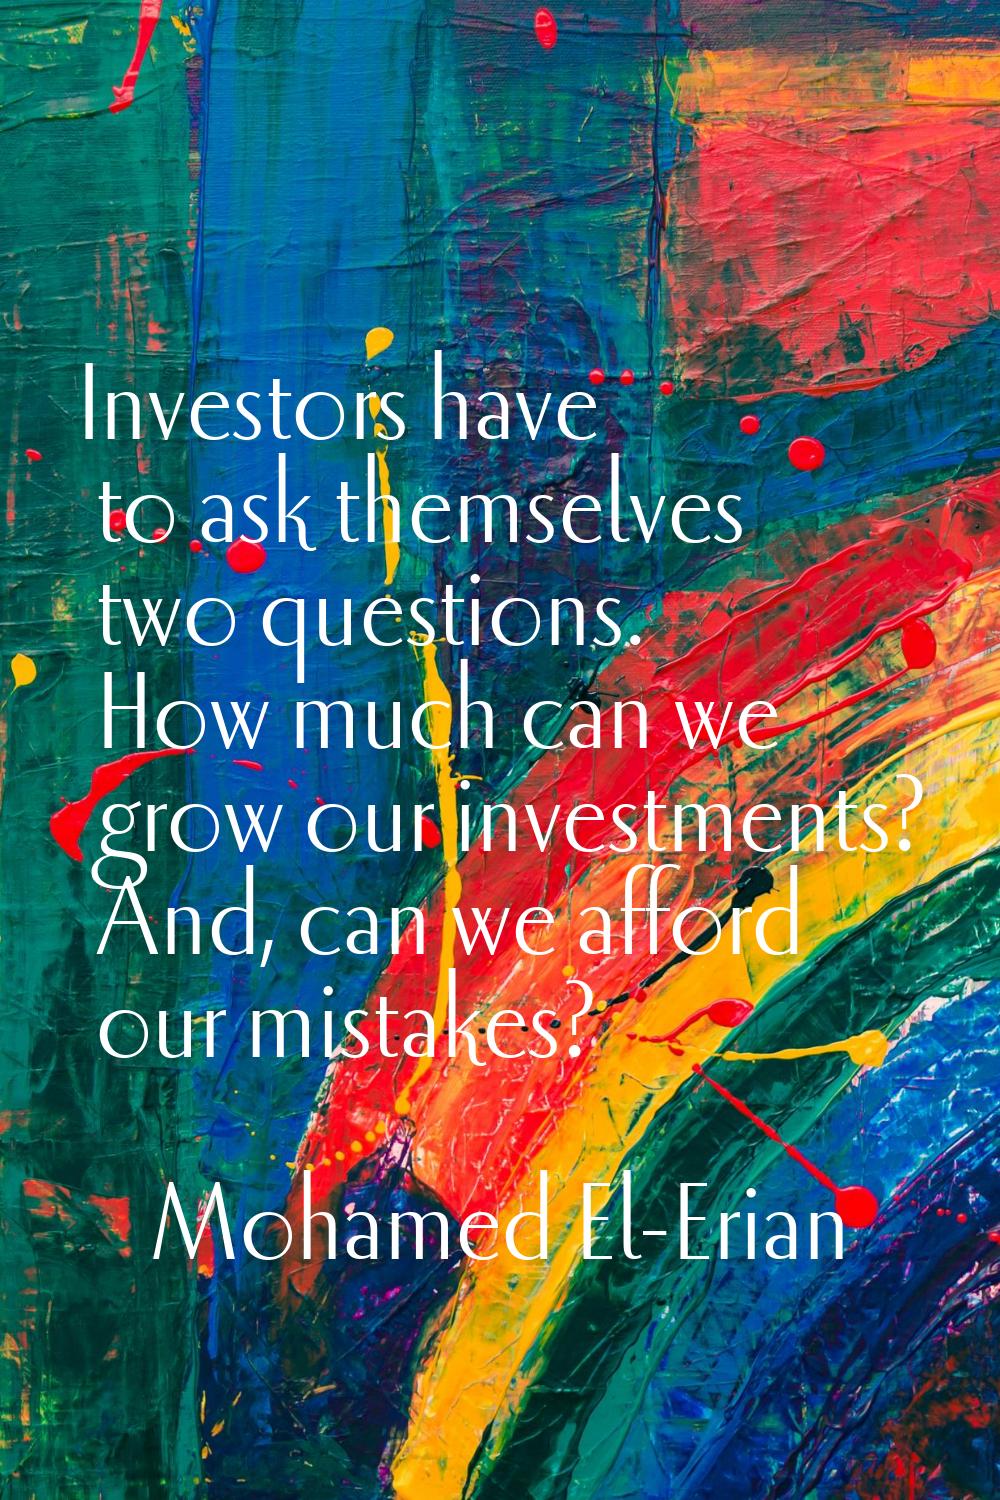 Investors have to ask themselves two questions. How much can we grow our investments? And, can we a